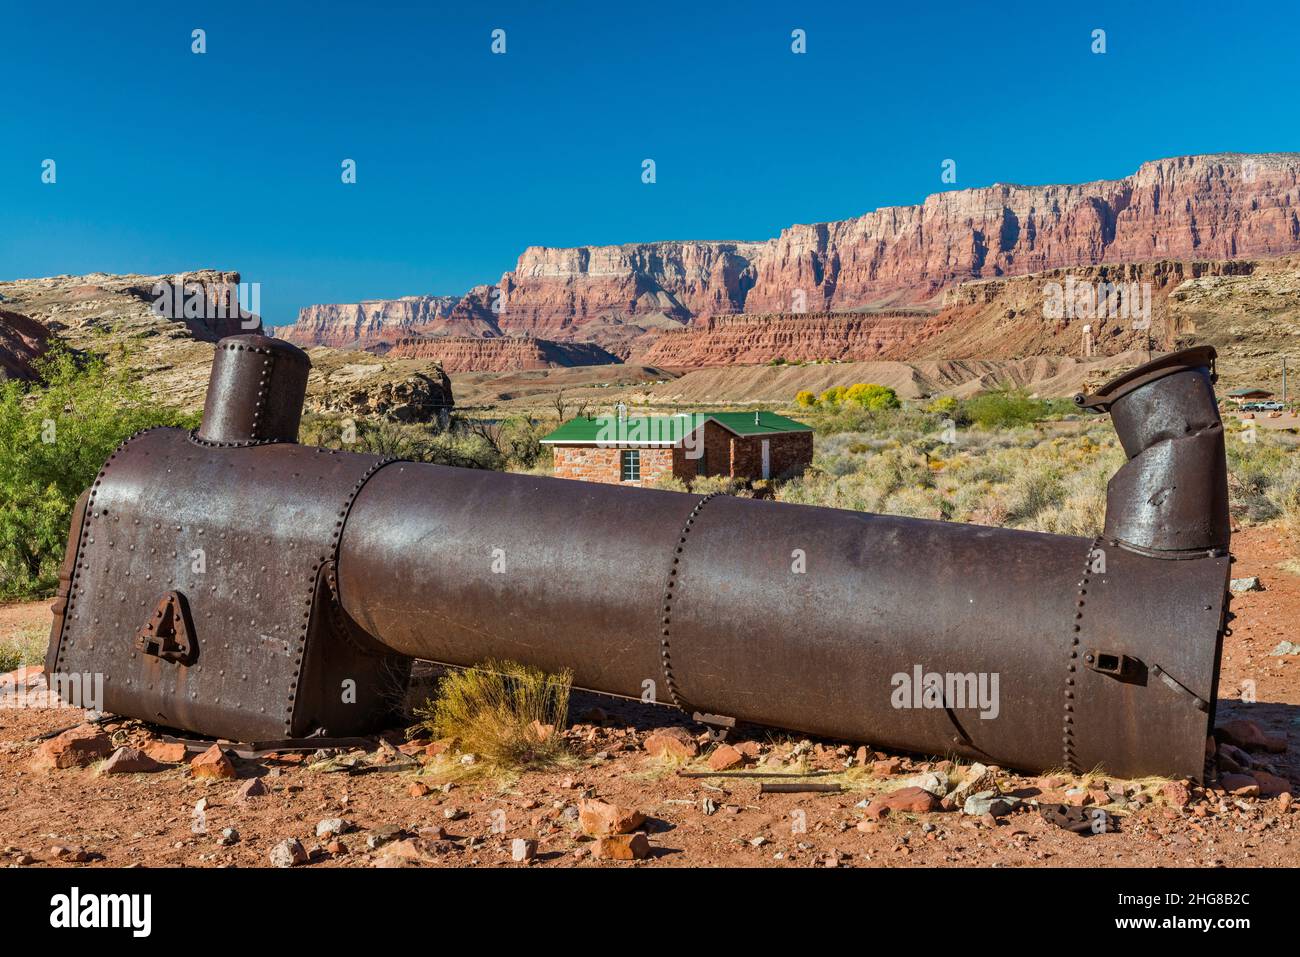 Spencer Boiler, 1910, steam engine to pump water, Vermilion Cliffs, Paria Plateau in dist, Lees Ferry, Glen Canyon National Recreation Area, Arizona Stock Photo